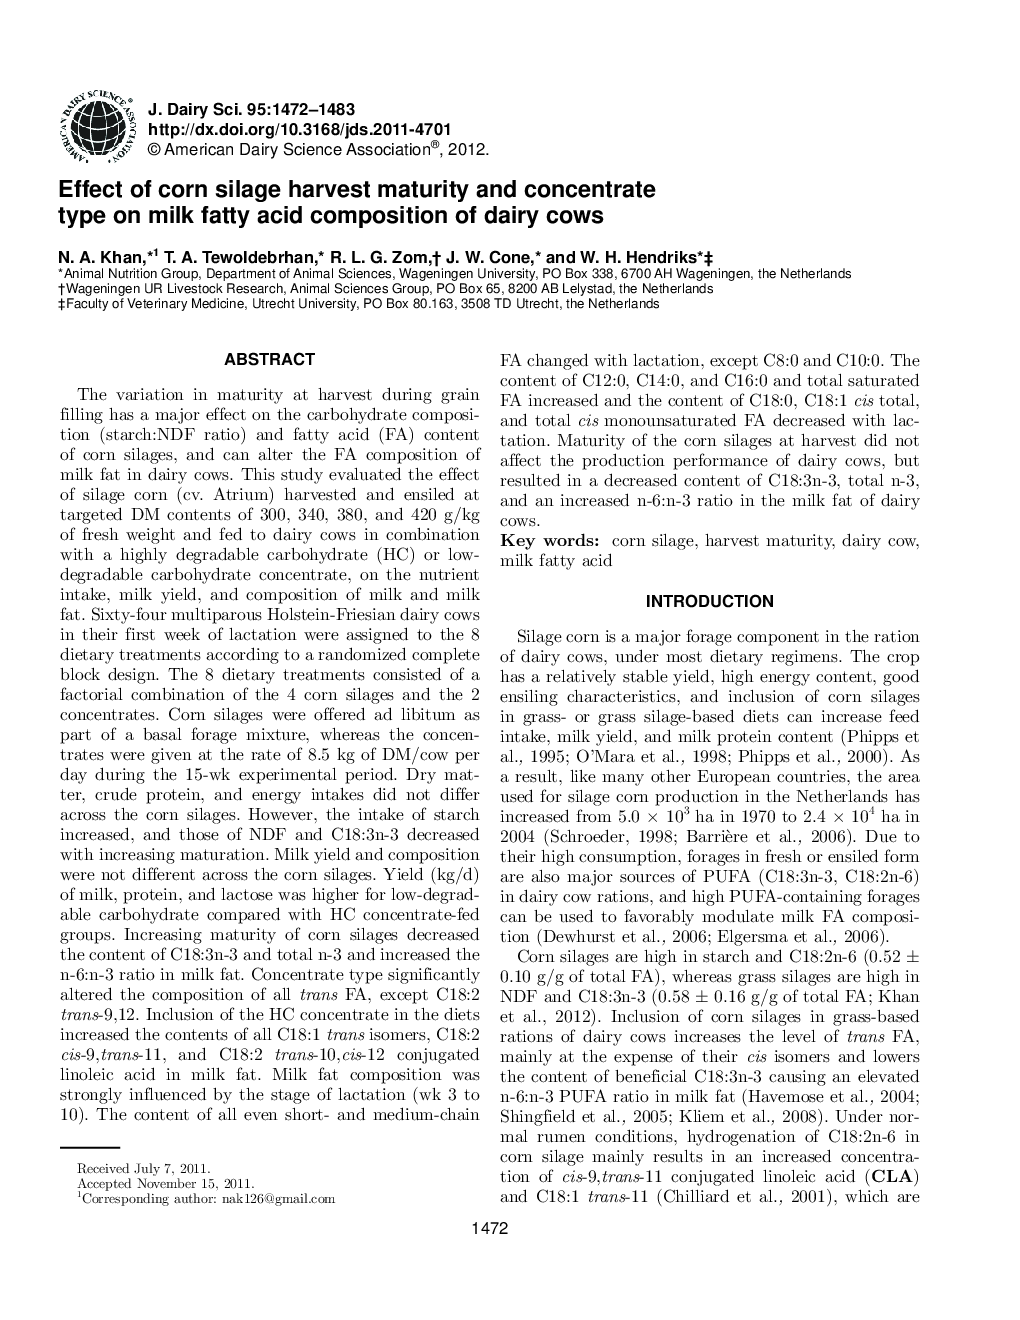 Effect of corn silage harvest maturity and concentrate type on milk fatty acid composition of dairy cows